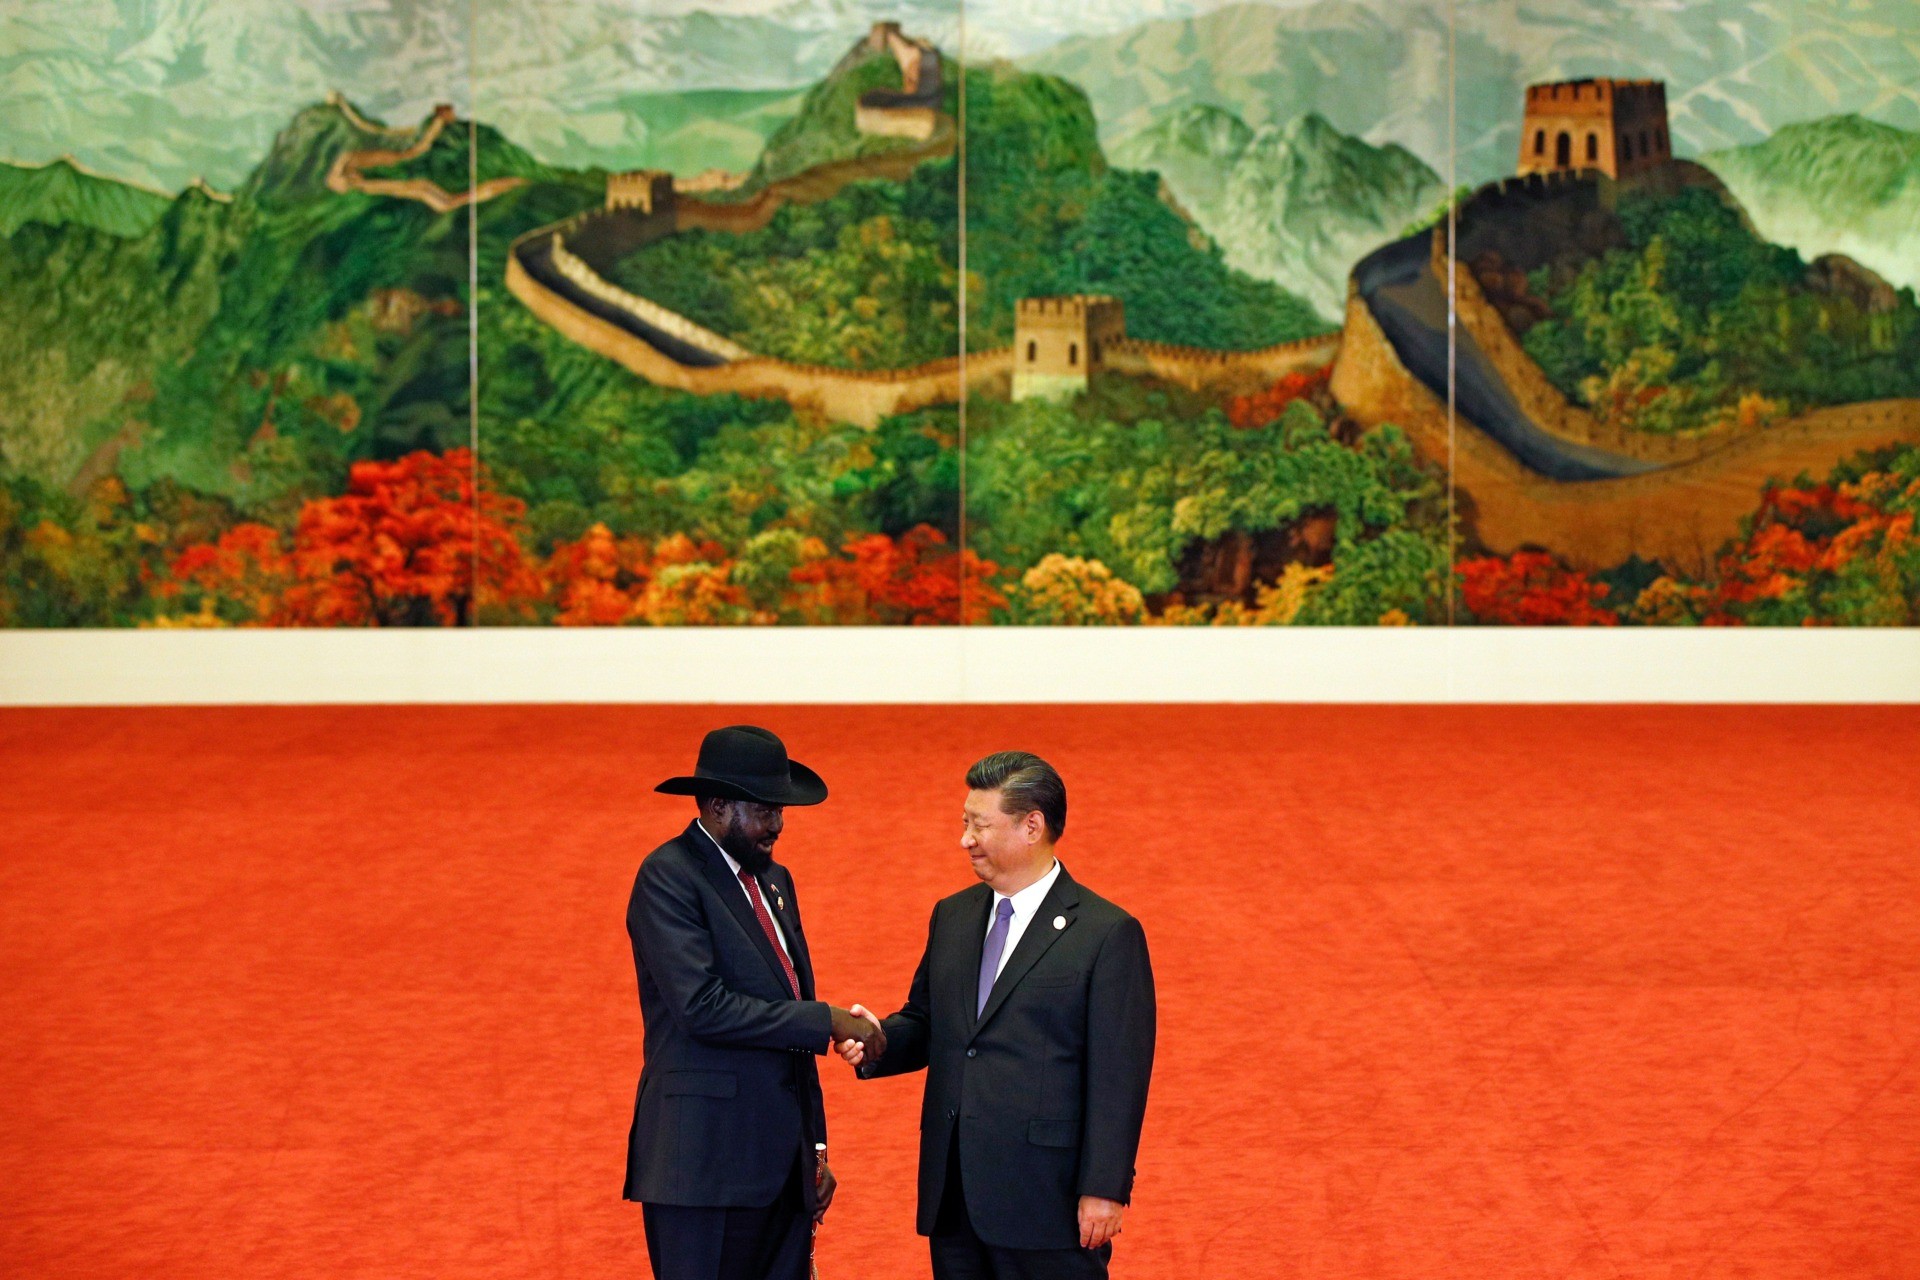 South Sudan's President Salva Kiir (L) shakes hands with China's President Xi Jinping during the Forum on China-Africa Cooperation at the Great Hall of the People in Beijing on September 3, 2018. - President Xi Jinping told African leaders on September 3 that China's investments on the continent have "no political strings attached", pledging $60 billion in new development financing, even as Beijing is increasingly criticised over its debt-heavy projects abroad. (Photo by Andy Wong / POOL / AFP) (Photo credit should read ANDY WONG/AFP via Getty Images)